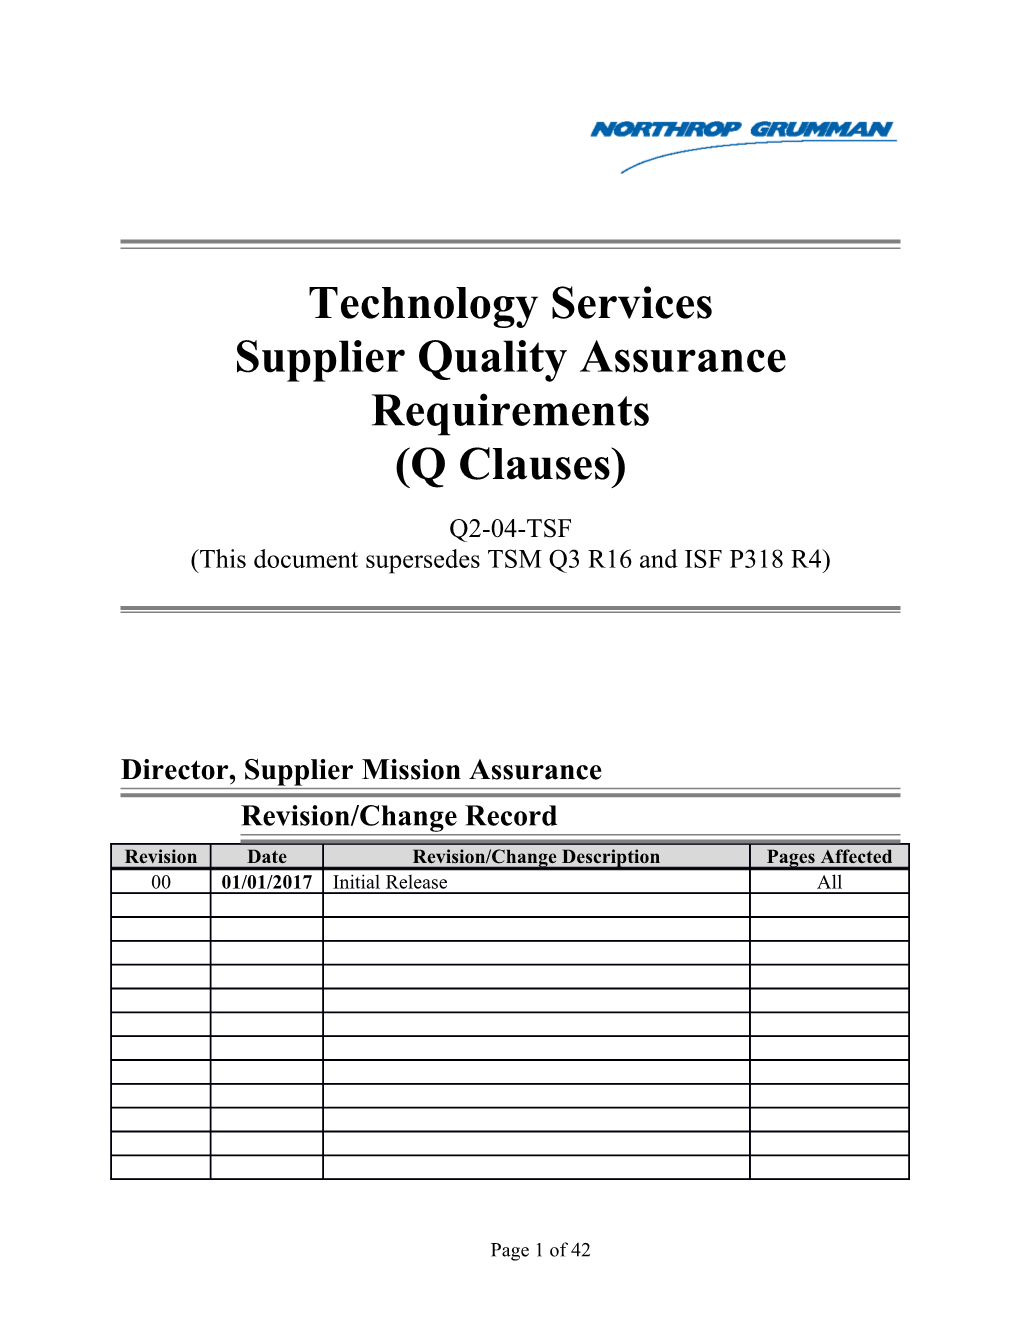 Technology Services Supplier Quality Assurance Requirements (Q-Clauses)